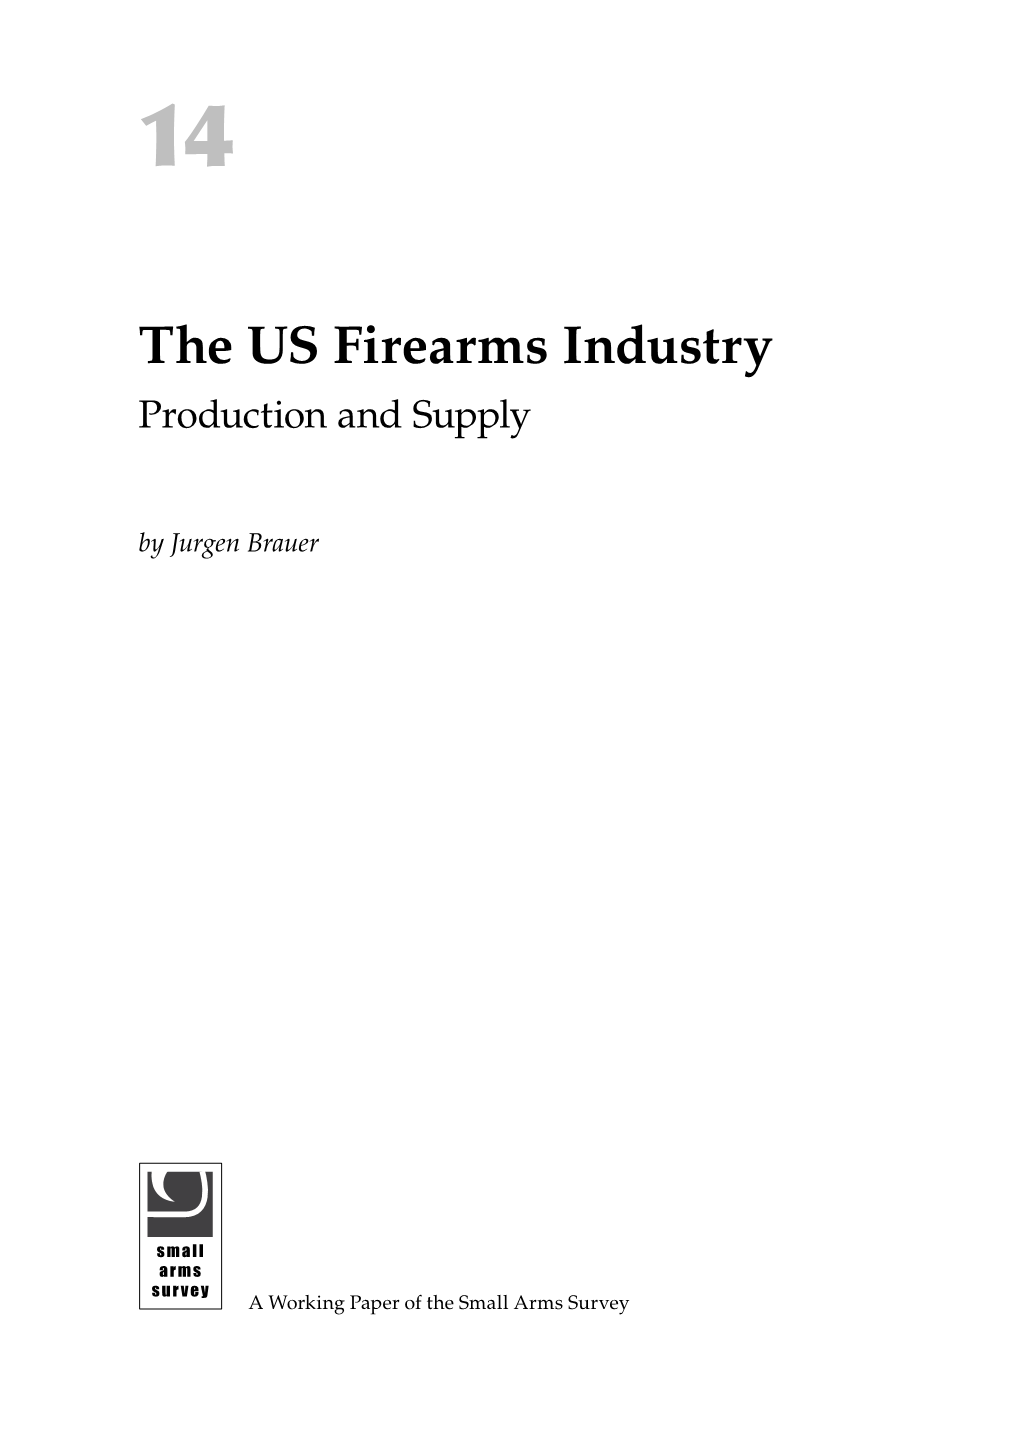 The US Firearms Industry Production and Supply